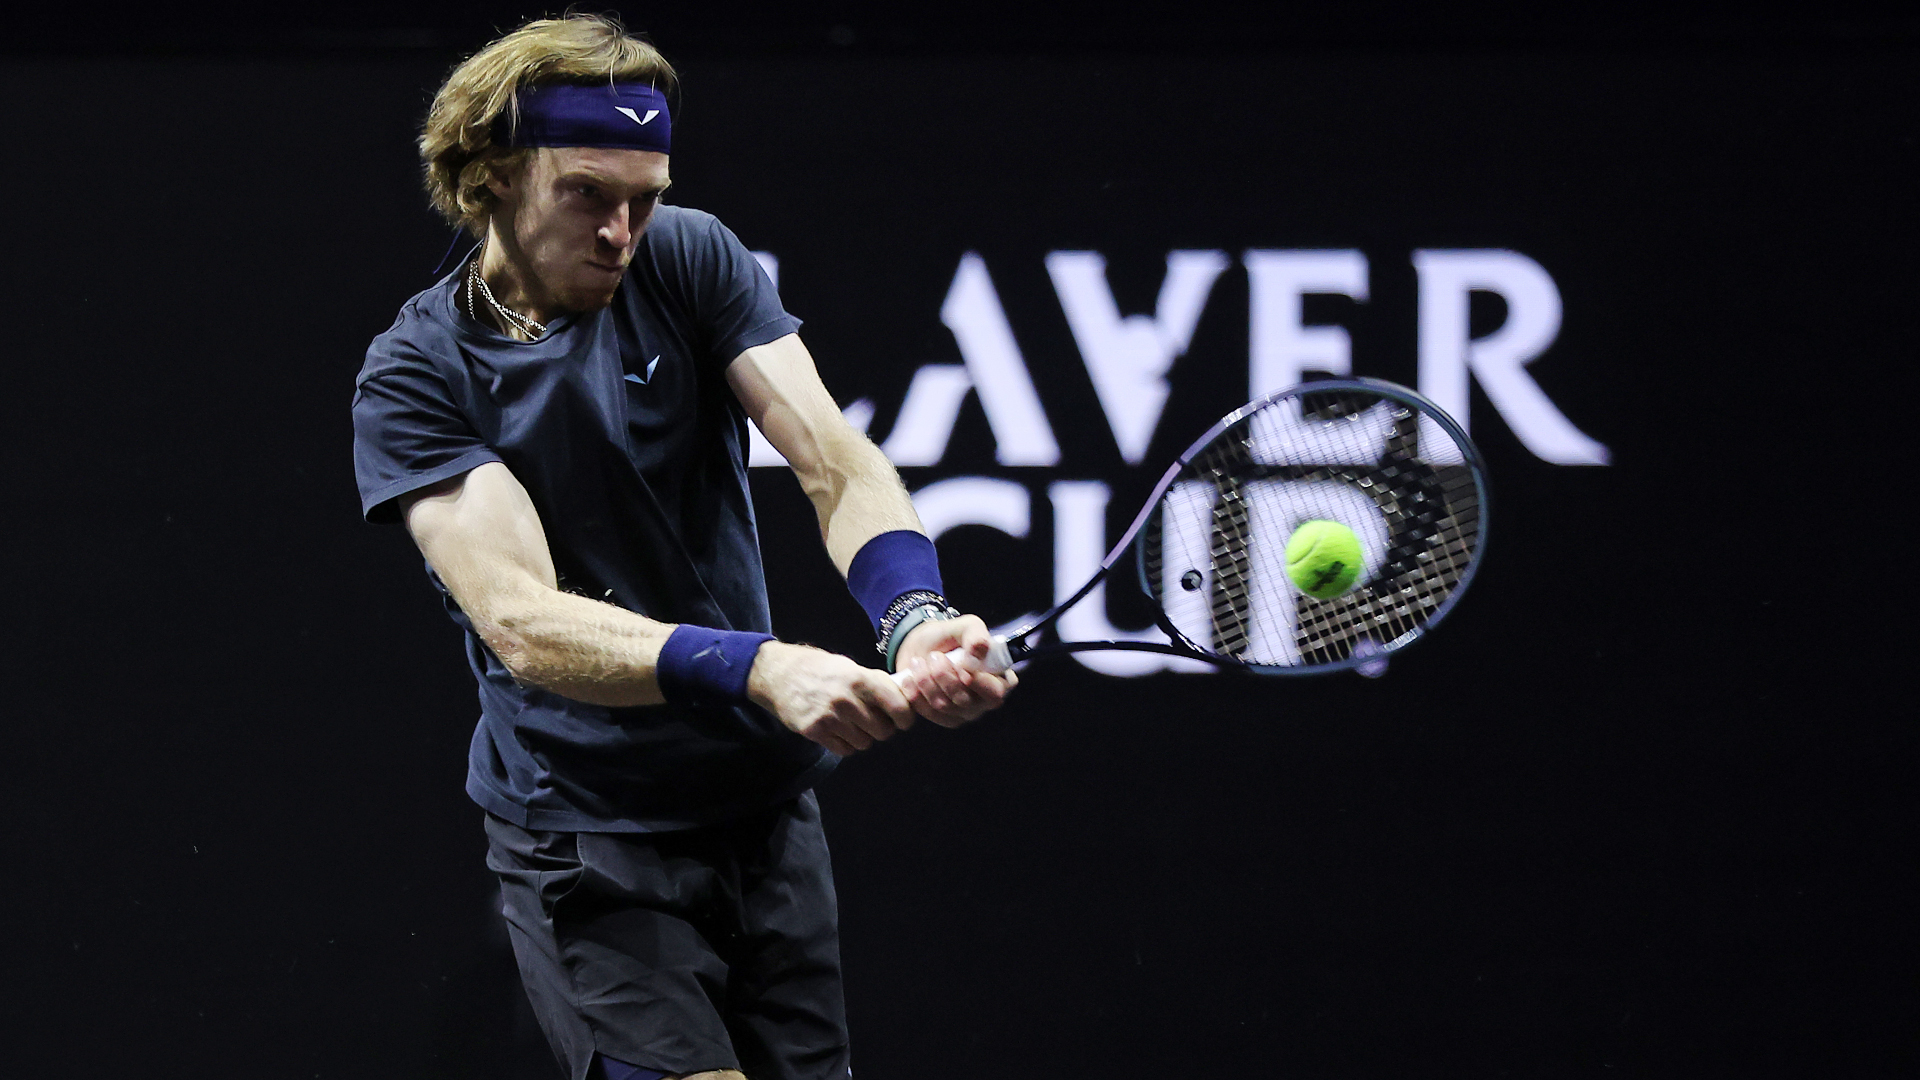 laver cup live stream online free